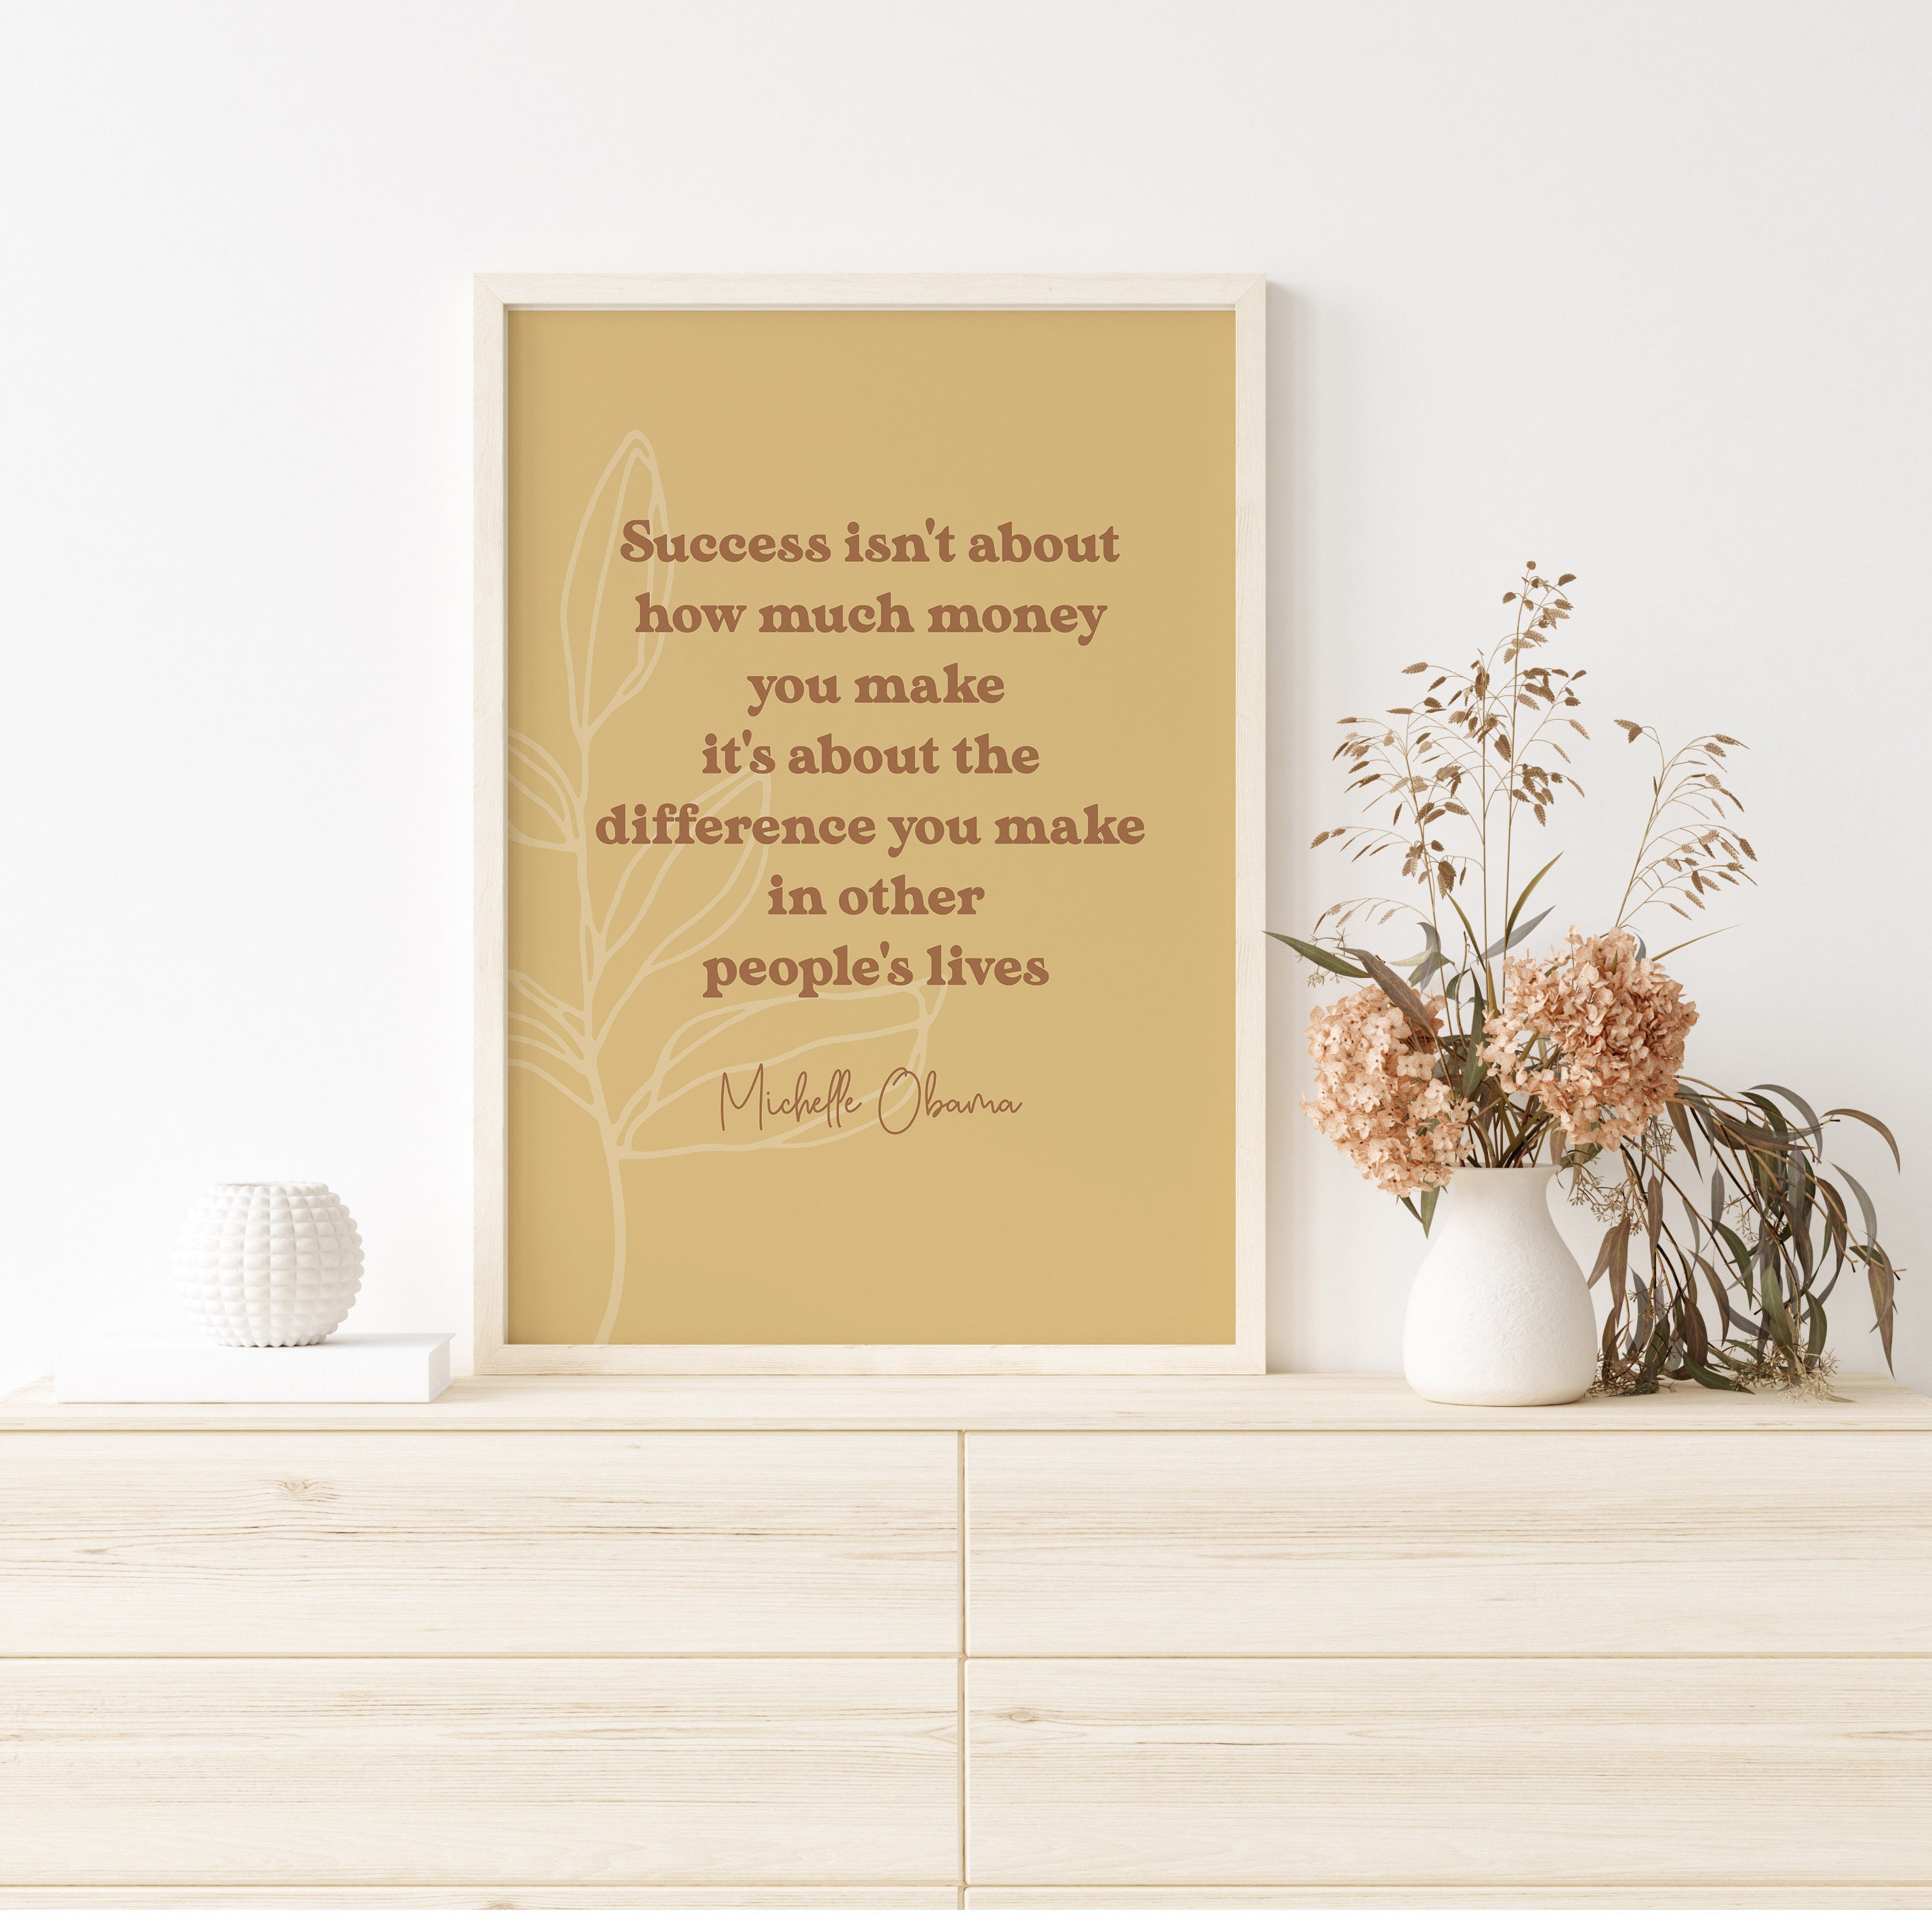 SUCCESS is not about Money.... MICHELLE OBAMA QUOTE Decorative Wall Art Print 